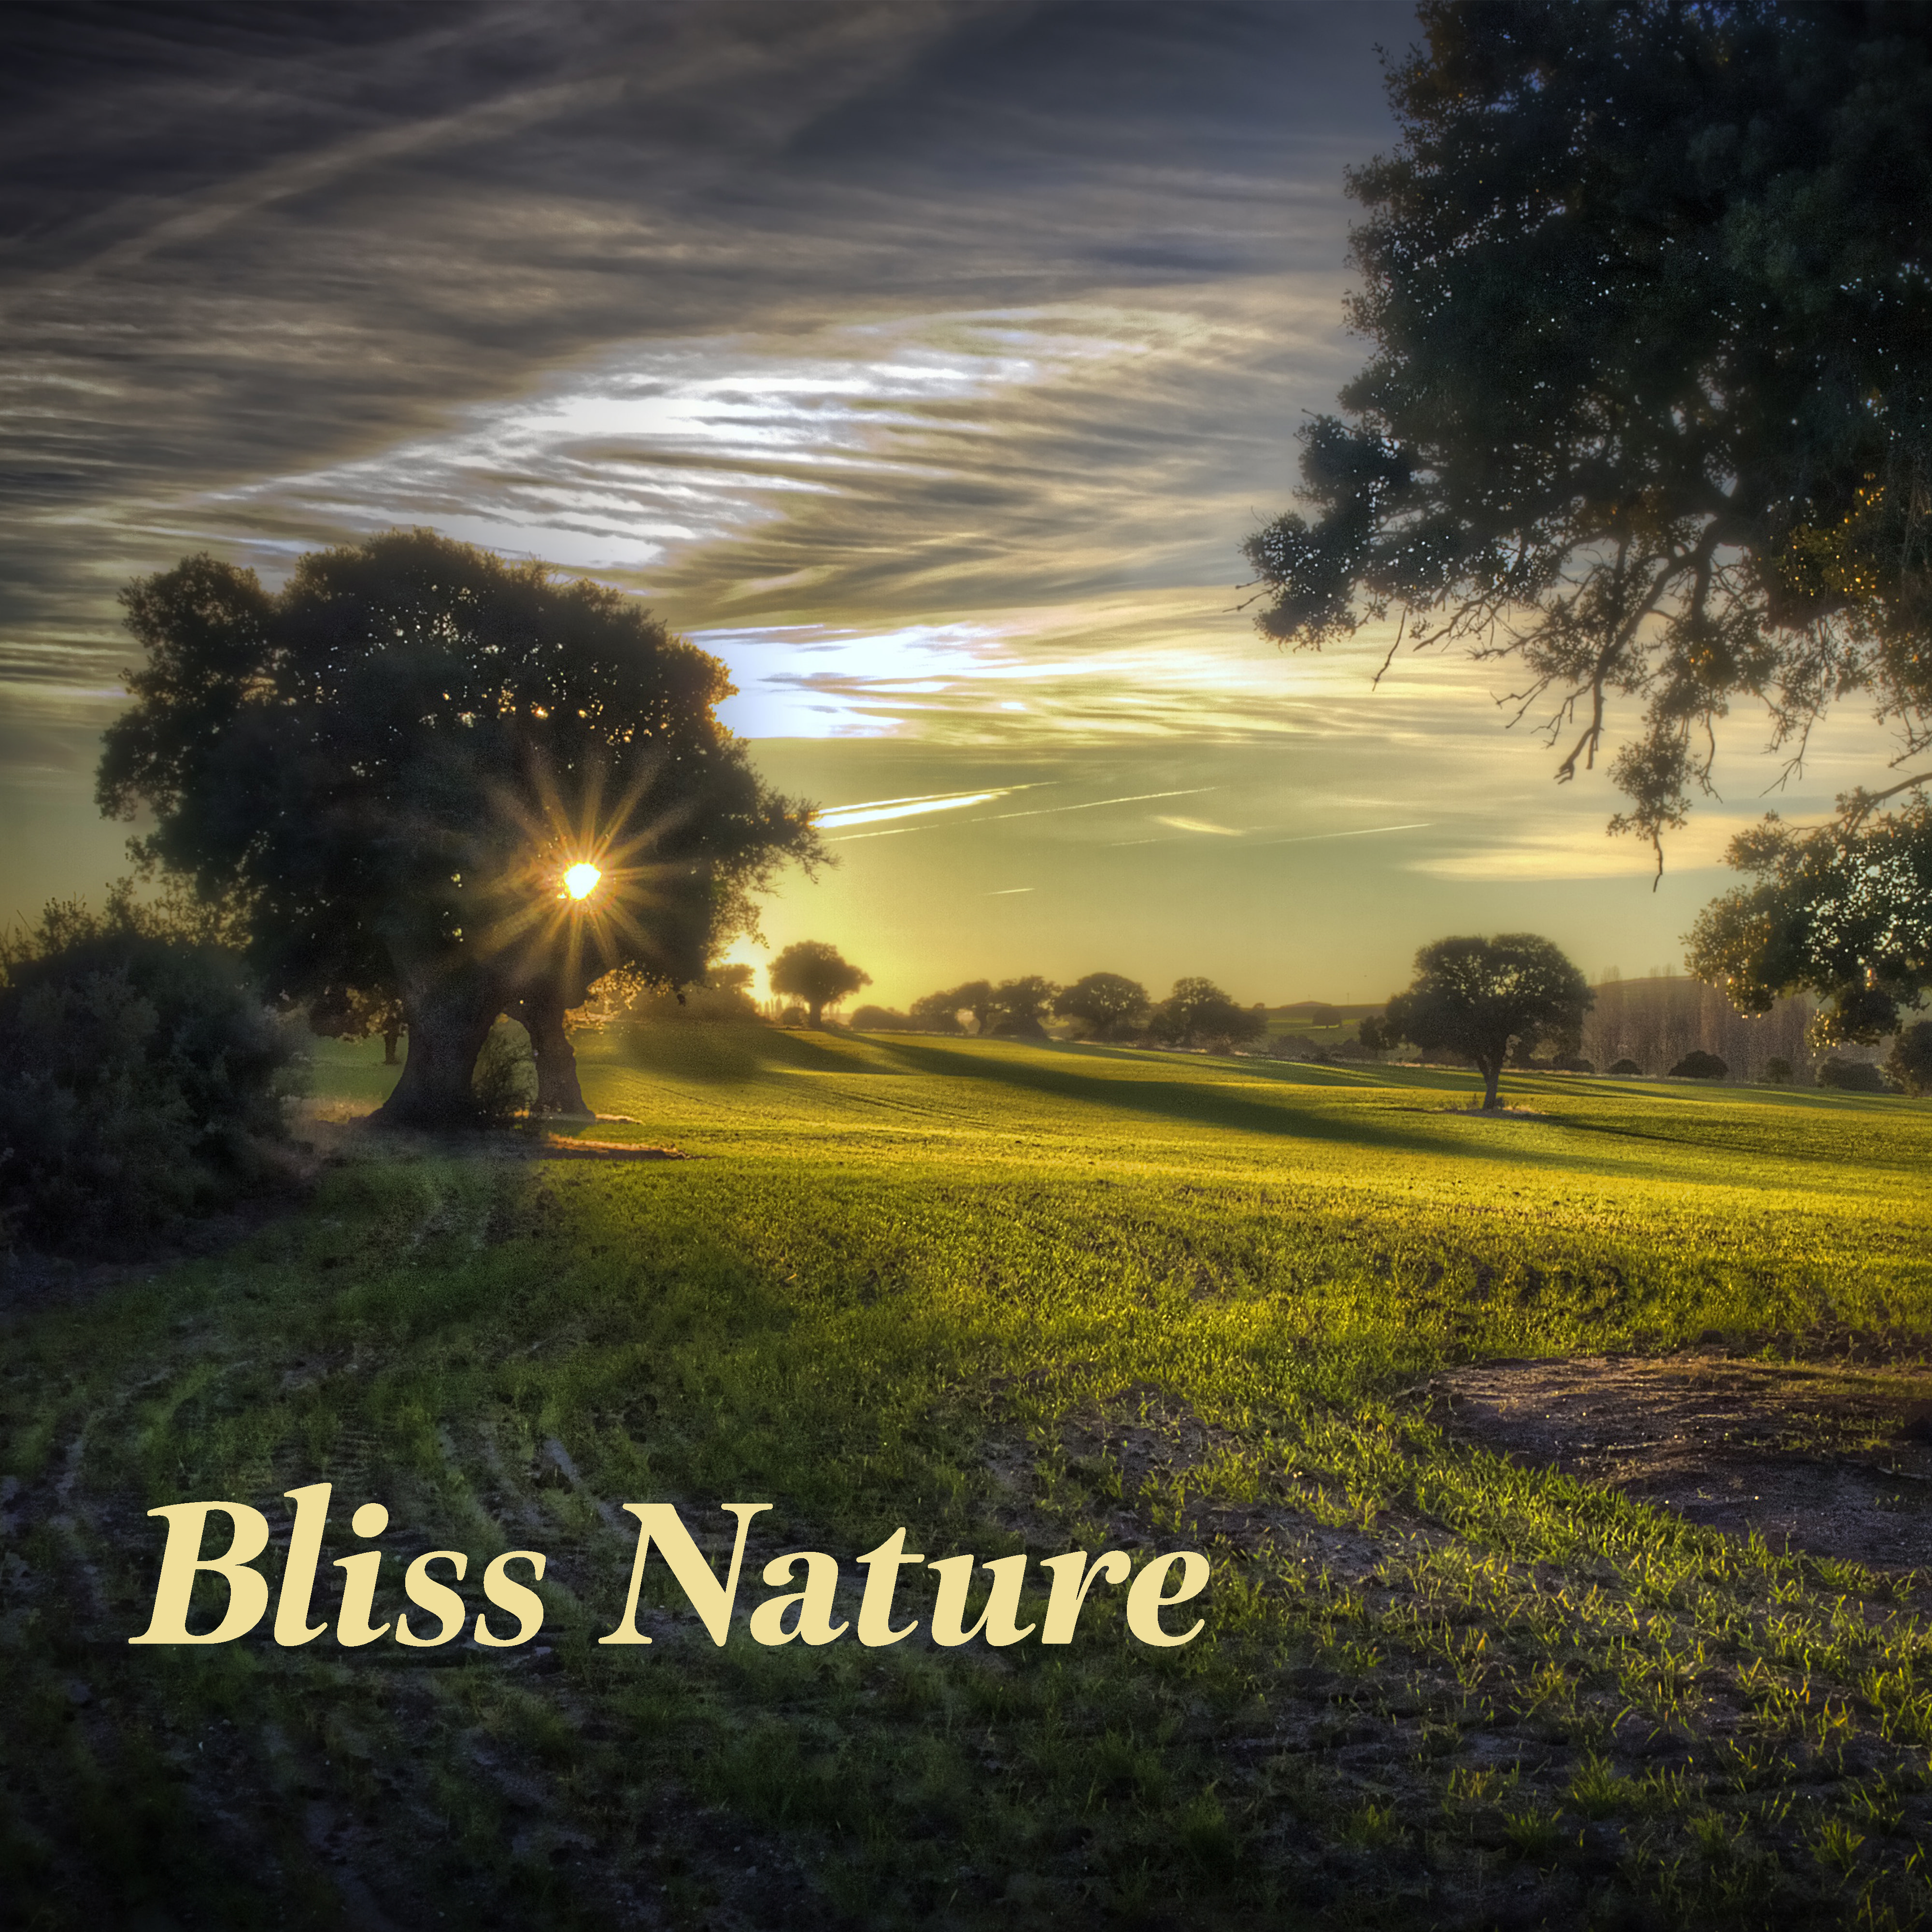 Bliss Nature